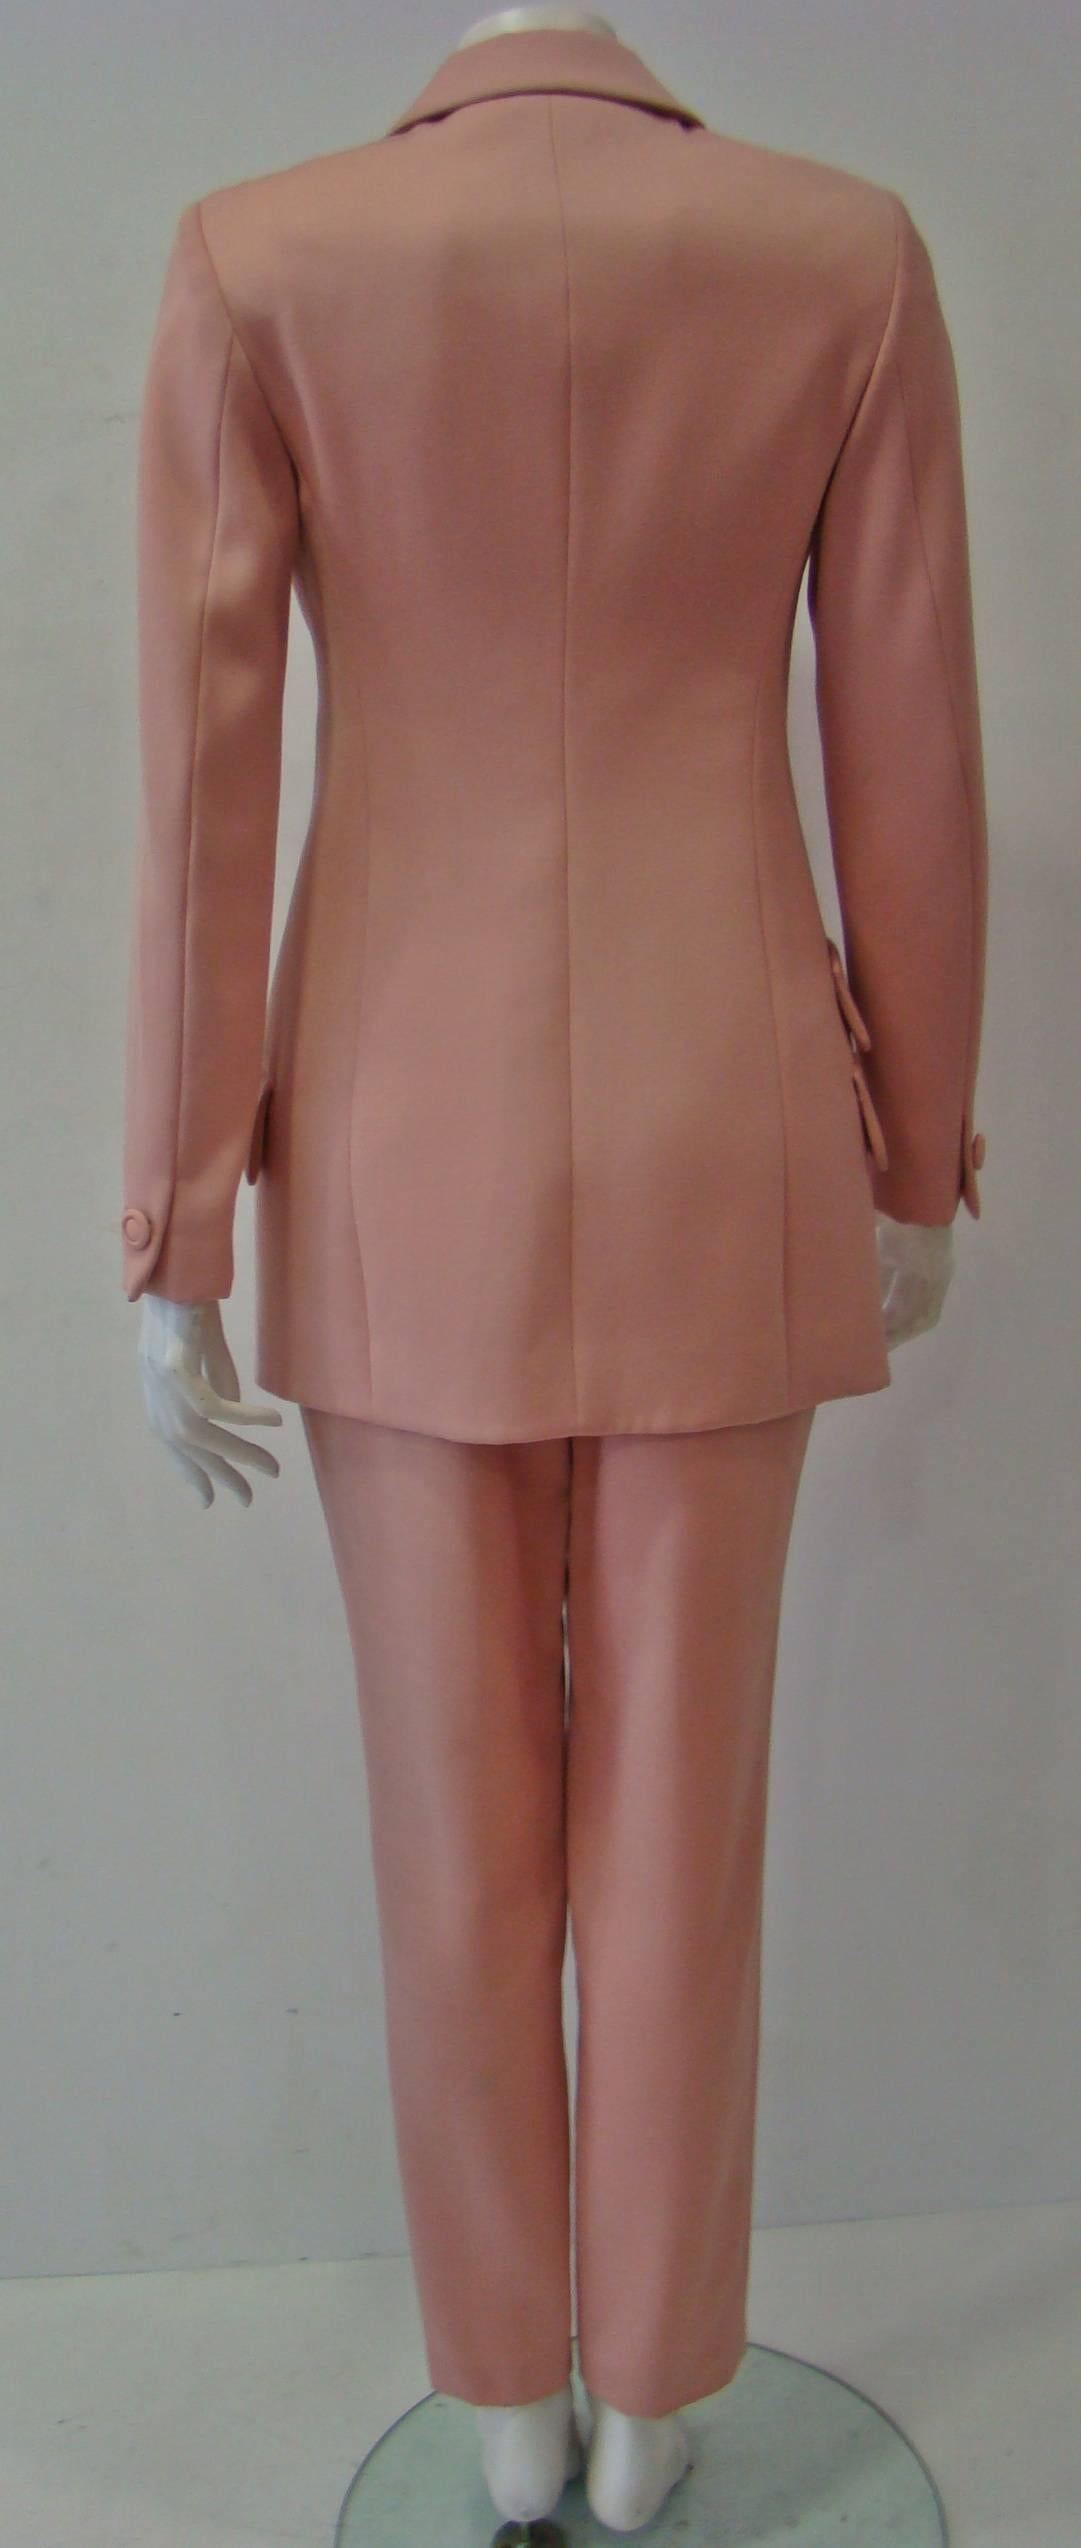 Gianni Versace Couture Salmon Pants Suit For Sale 3